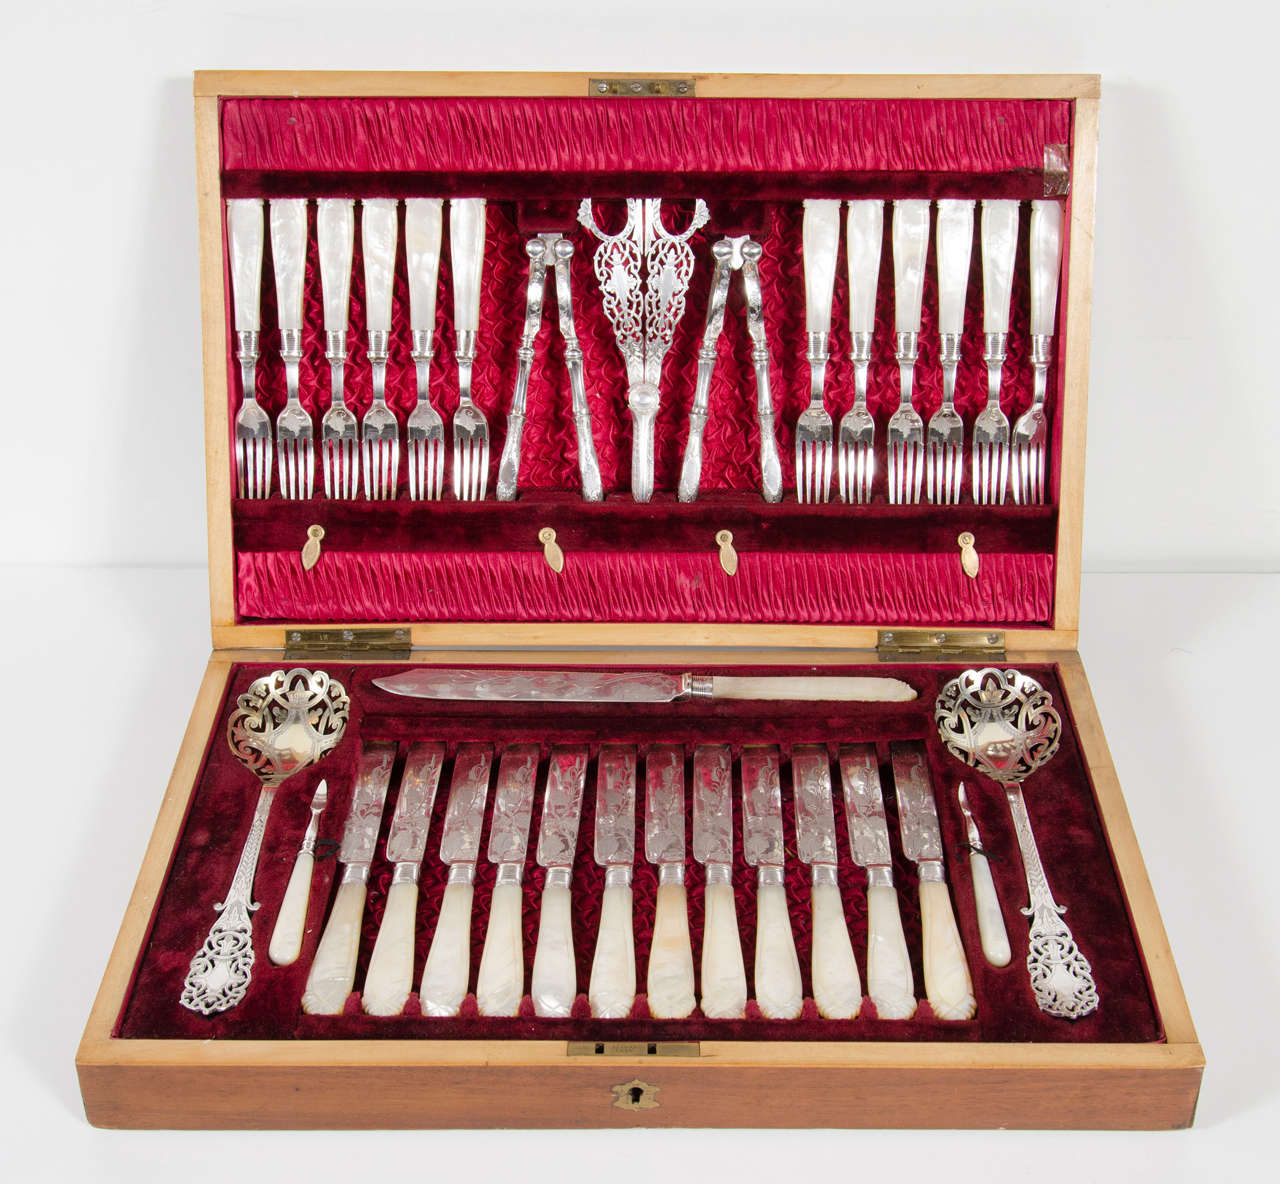 Elaborate silver and mother-of-pearl, silver plate flatware set. Original box with shield crest and fittings and was originally commissioned by The Earl of Tankerville of Chillington. It is comprised of 12 forks, 12 knives, two nut crackers, two nut